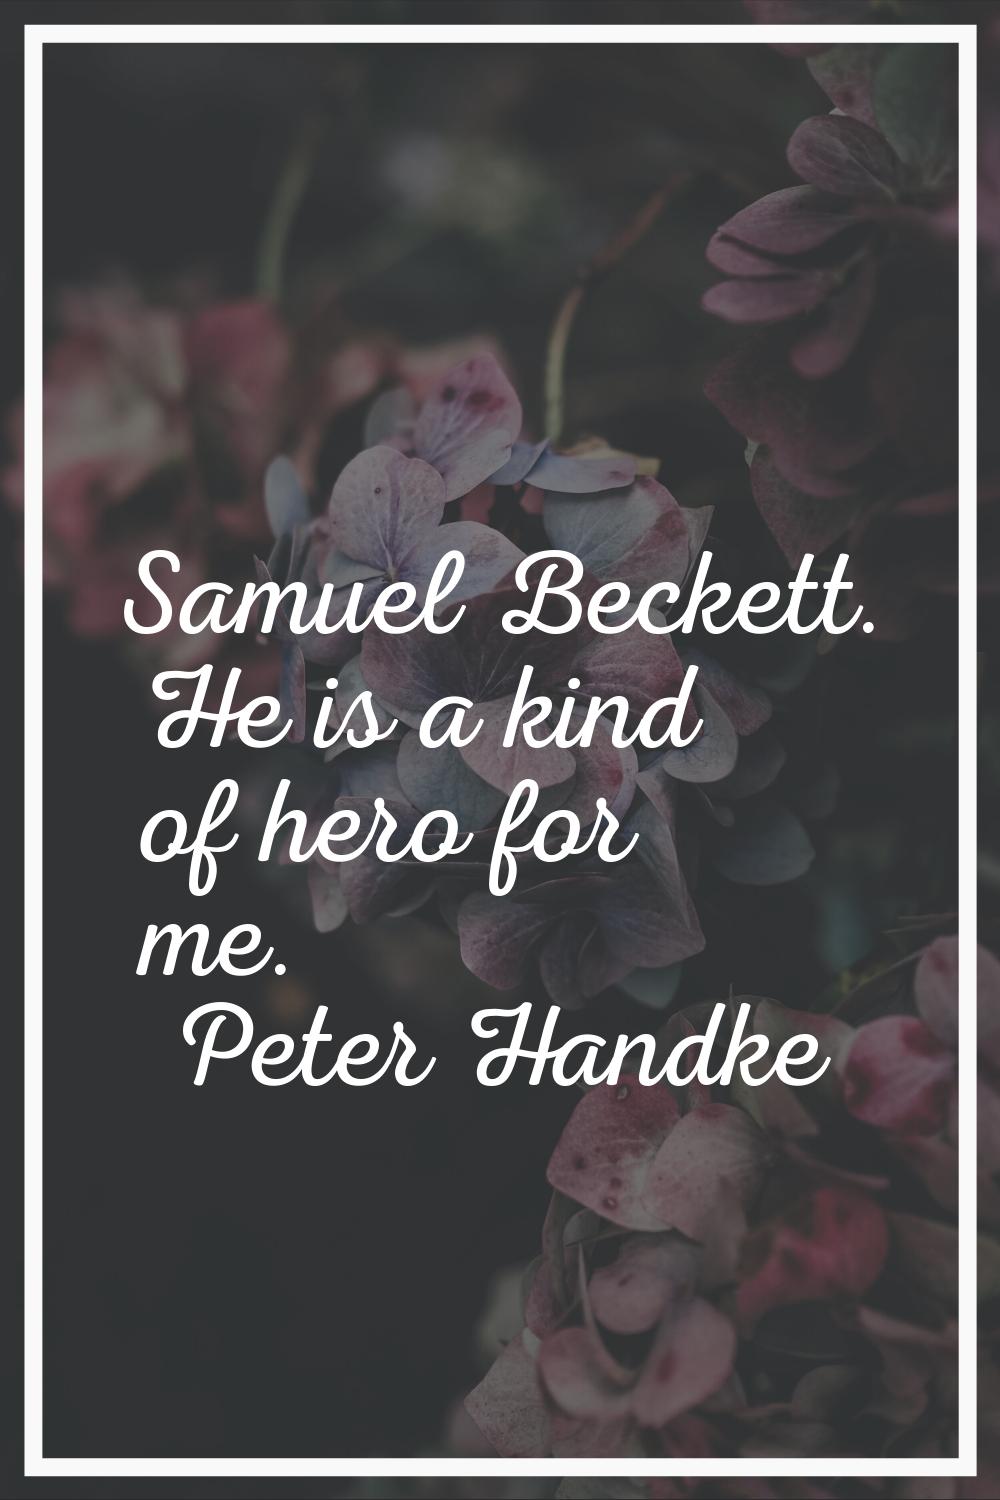 Samuel Beckett. He is a kind of hero for me.